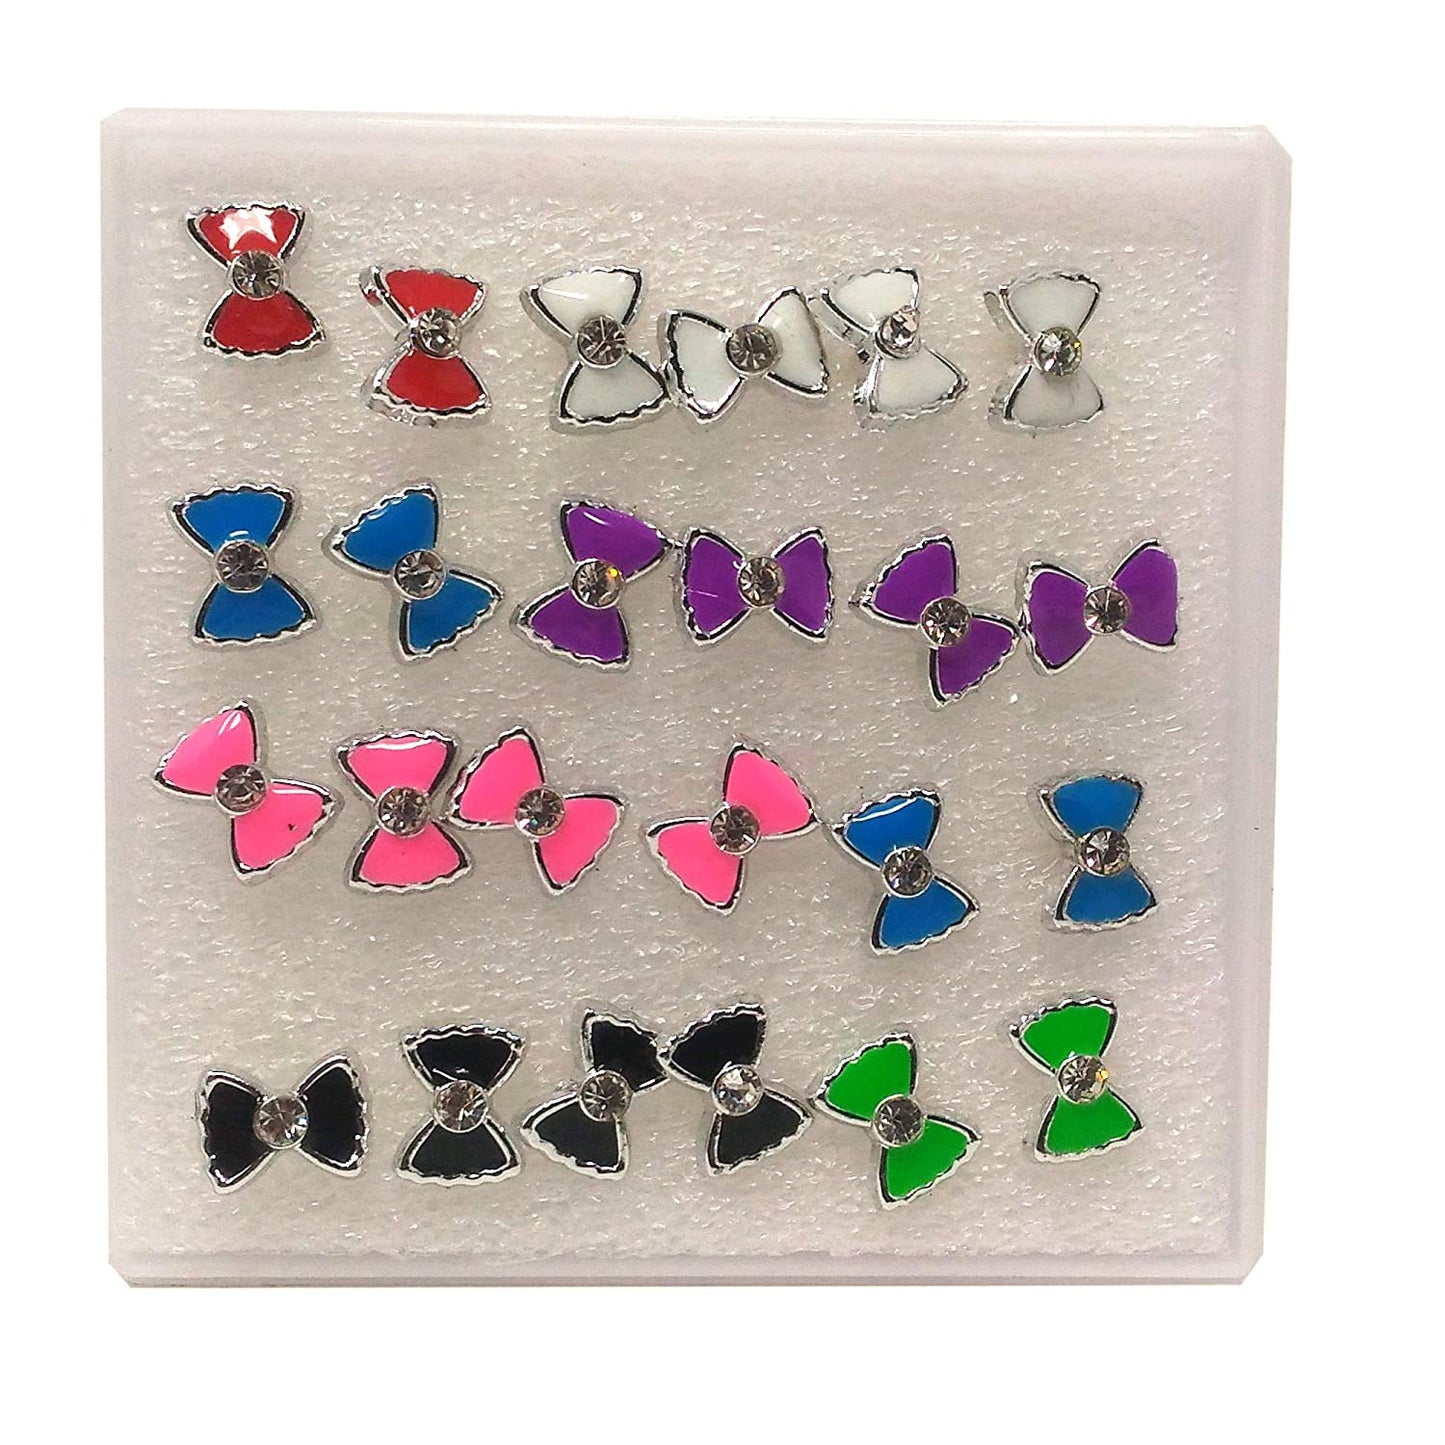 Anokhi ADA Multi-colour Rhinestone Studded Bow Plastic Stud Earrings for Girls and Women (Pack of 12 Pairs)-(AR-12)